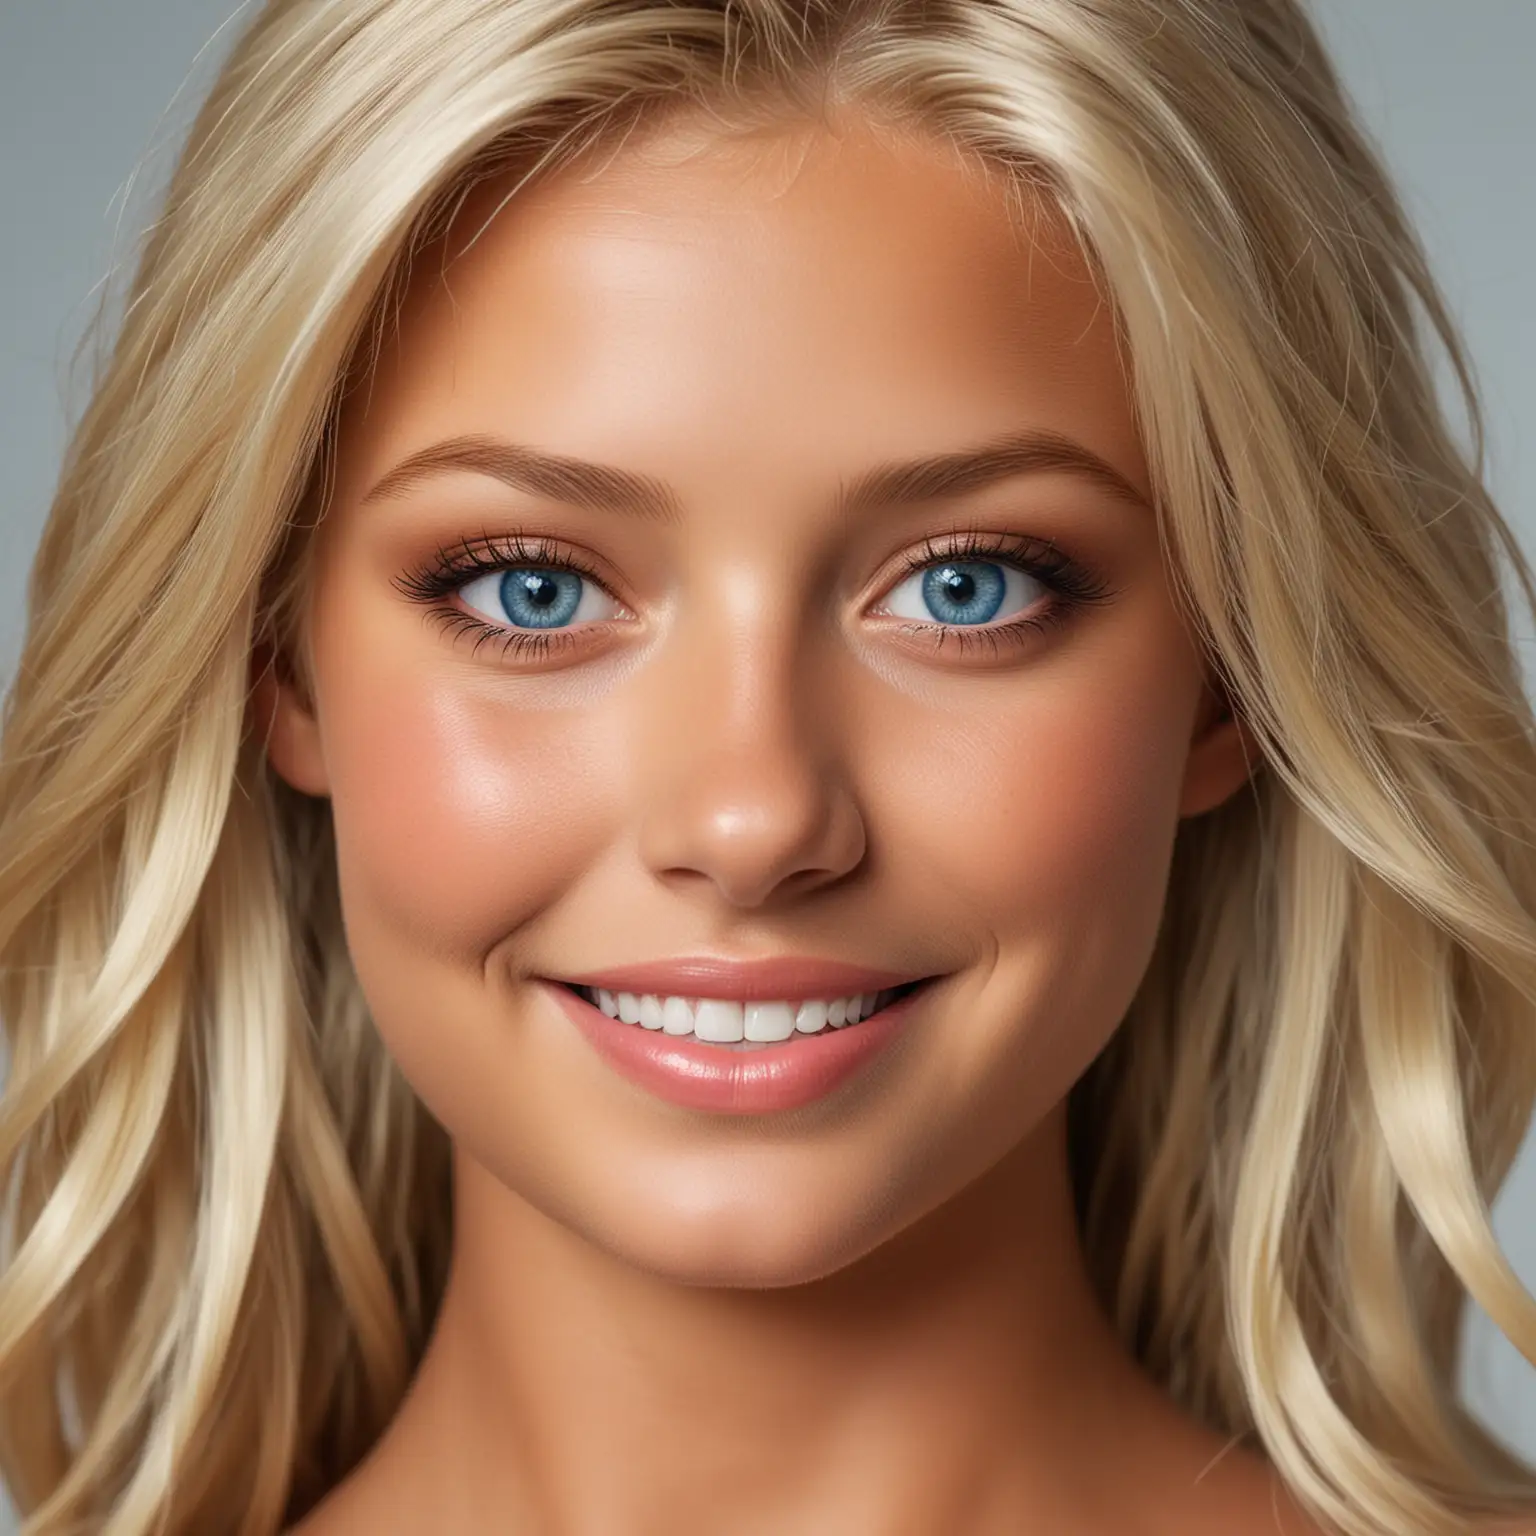 worlds most beautiful realistic blonde model, 5 foot 10 inchs tall, perfect tan, blue eyes, smiling.